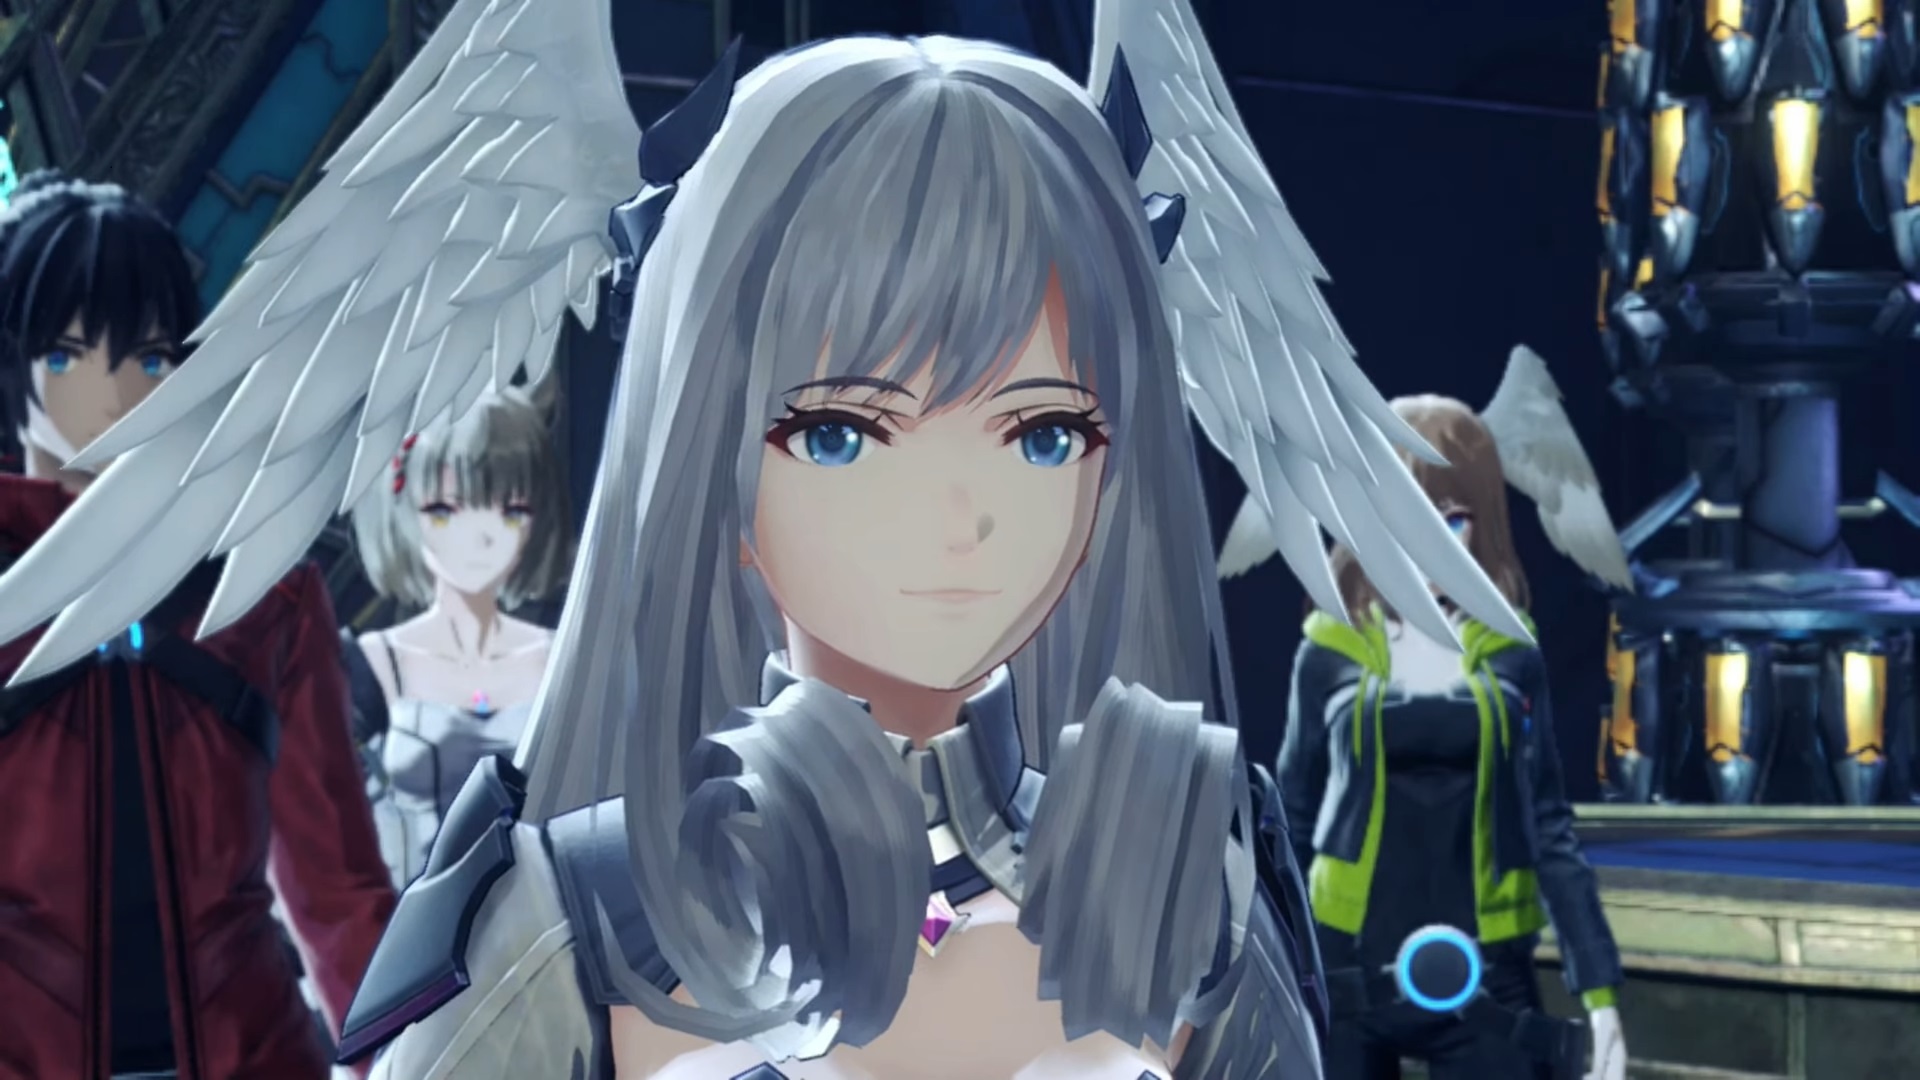 Melia is an unlockable character in Xenoblade Chronicles 3.